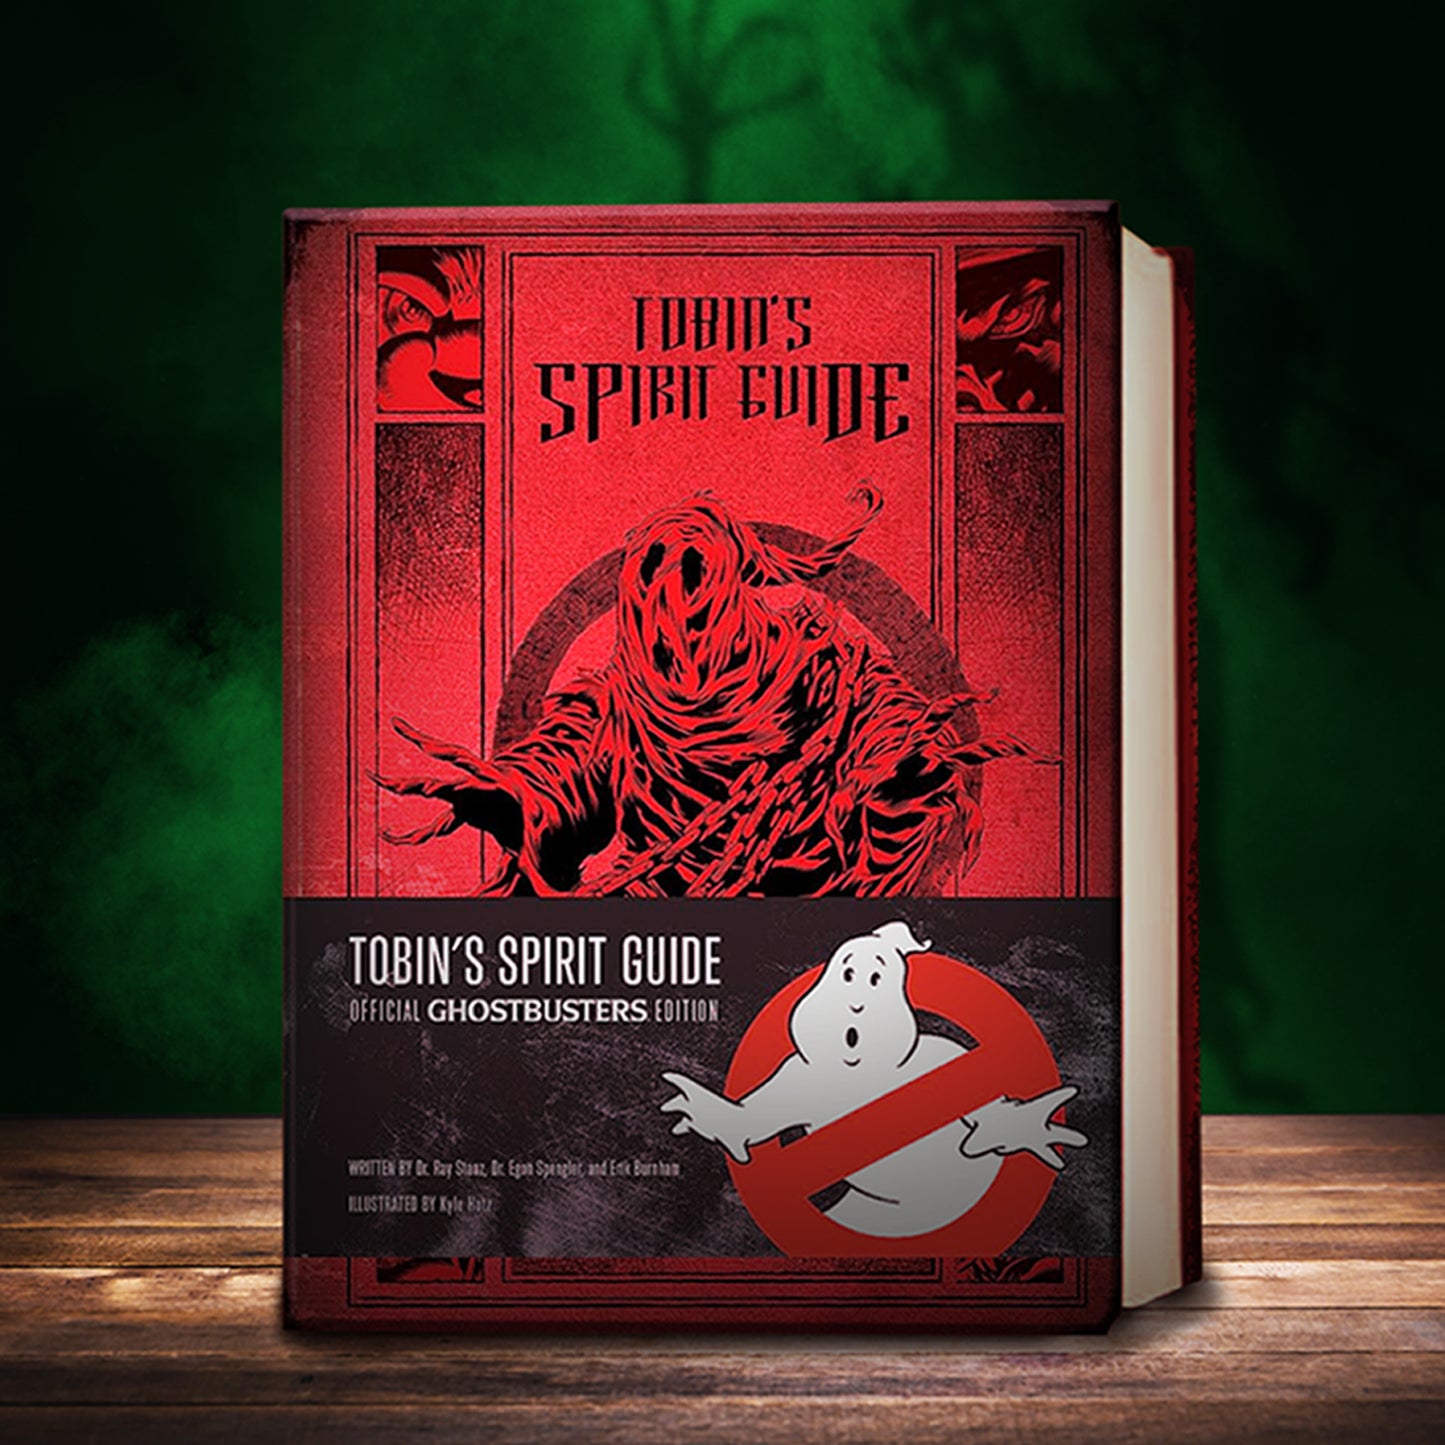 A red book cover with the title "Tobin's spirit guide" in black text. In the center is a black drawing of a creepy robed ghost. At the bottom of the cover is a black band with the book title, and the Ghostbusters logo on the right side. The book is sitting on a wood table top, in front of a smoky green and black background.